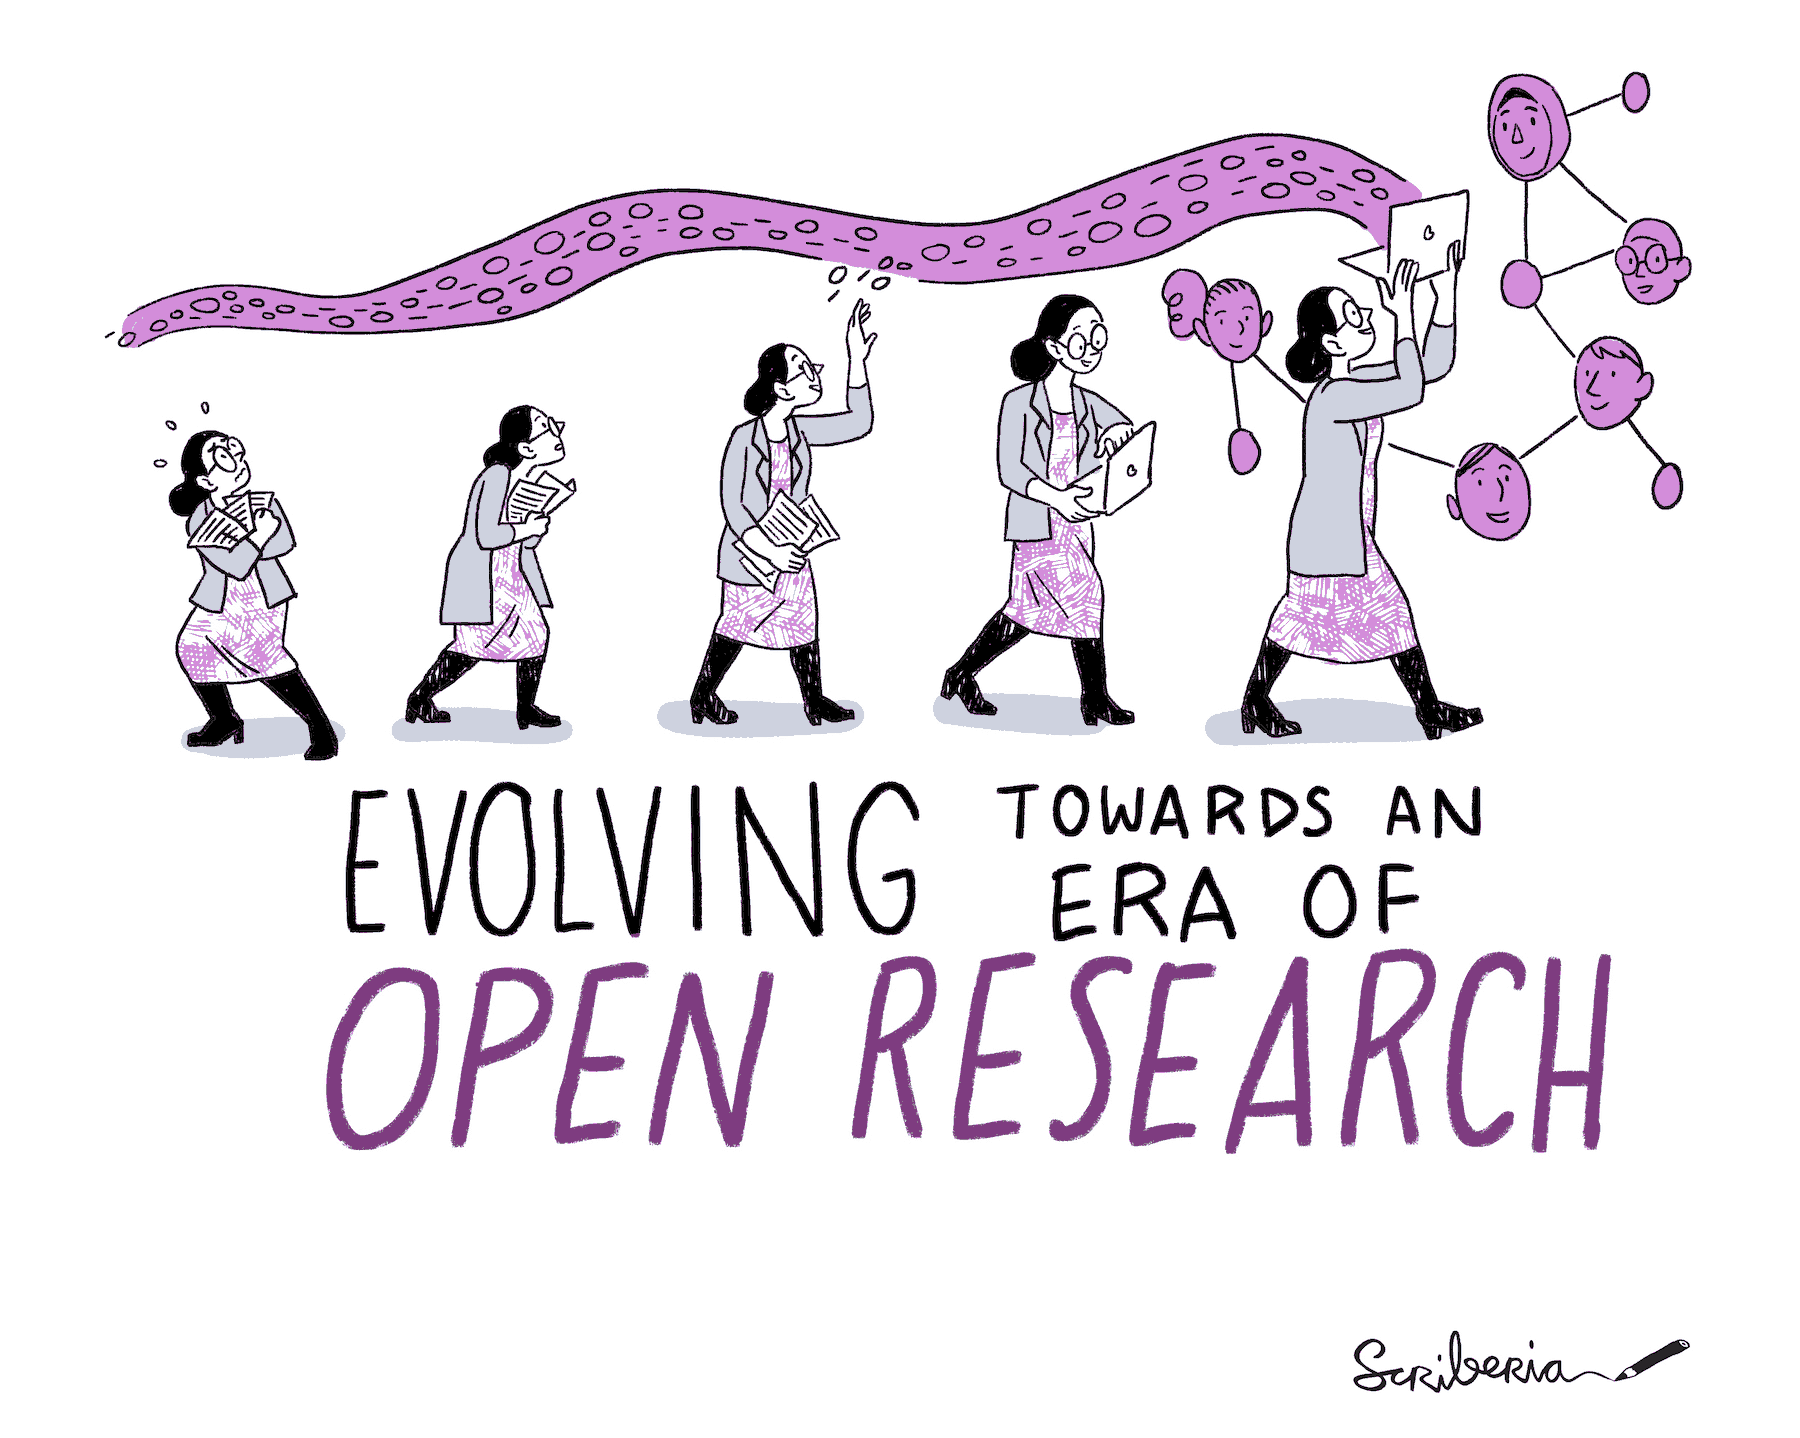 This is an example of one of The Turing Way illustrations. It tries to shows the evolution towards an open science era